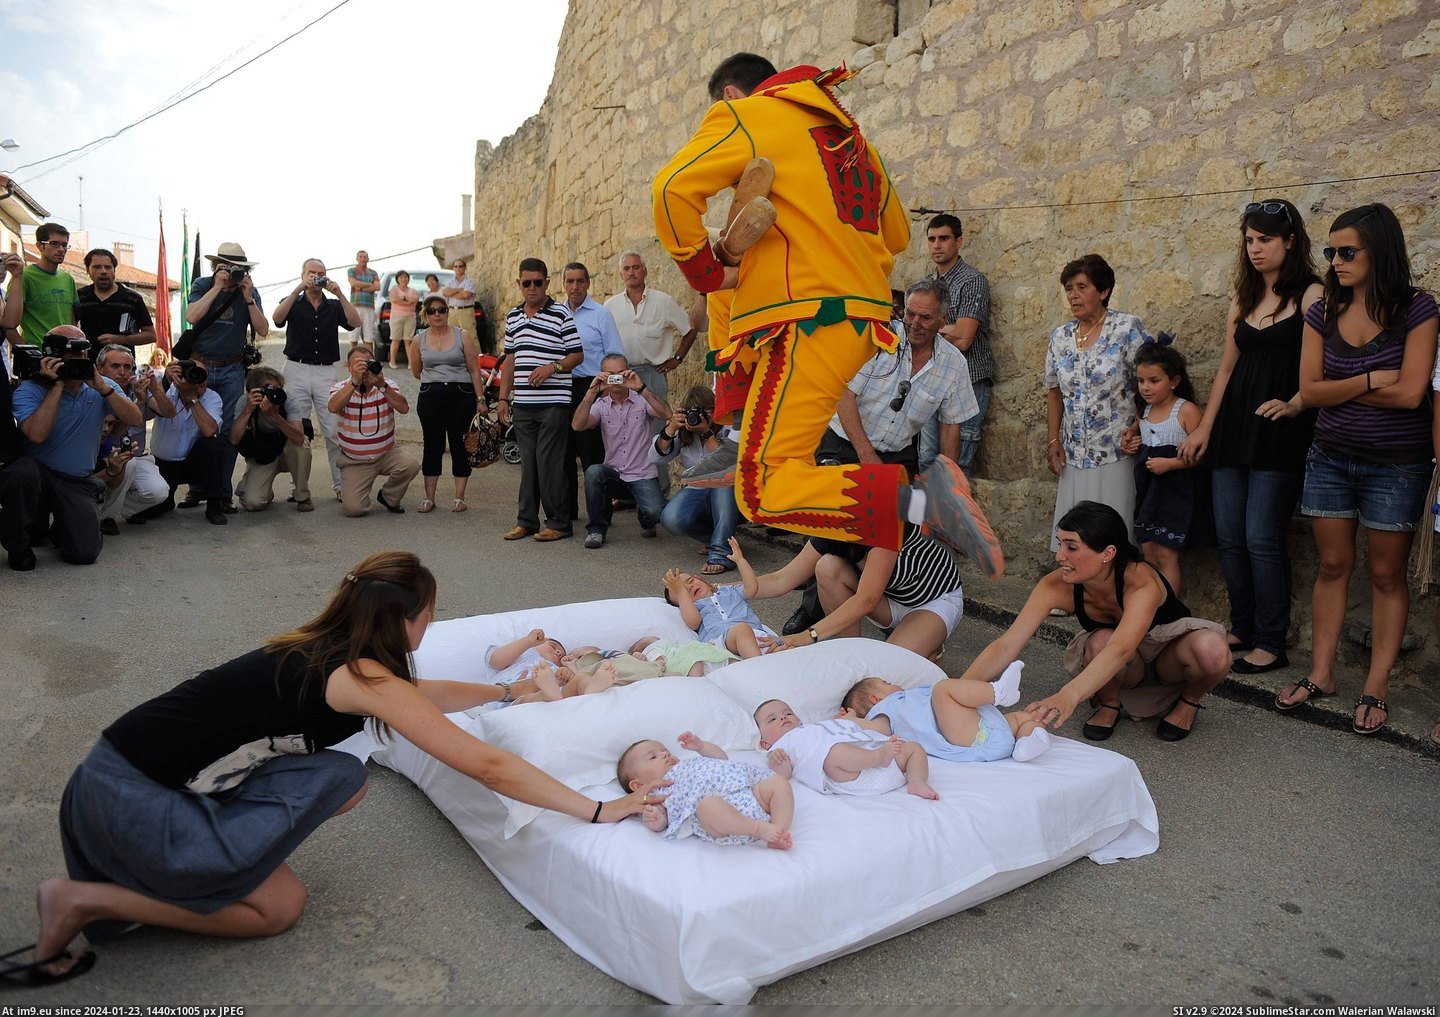 #Wtf #Baby #Festival #Spain #Jumping [Wtf] Baby Jumping Festival in Spain Pic. (Obraz z album My r/WTF favs))